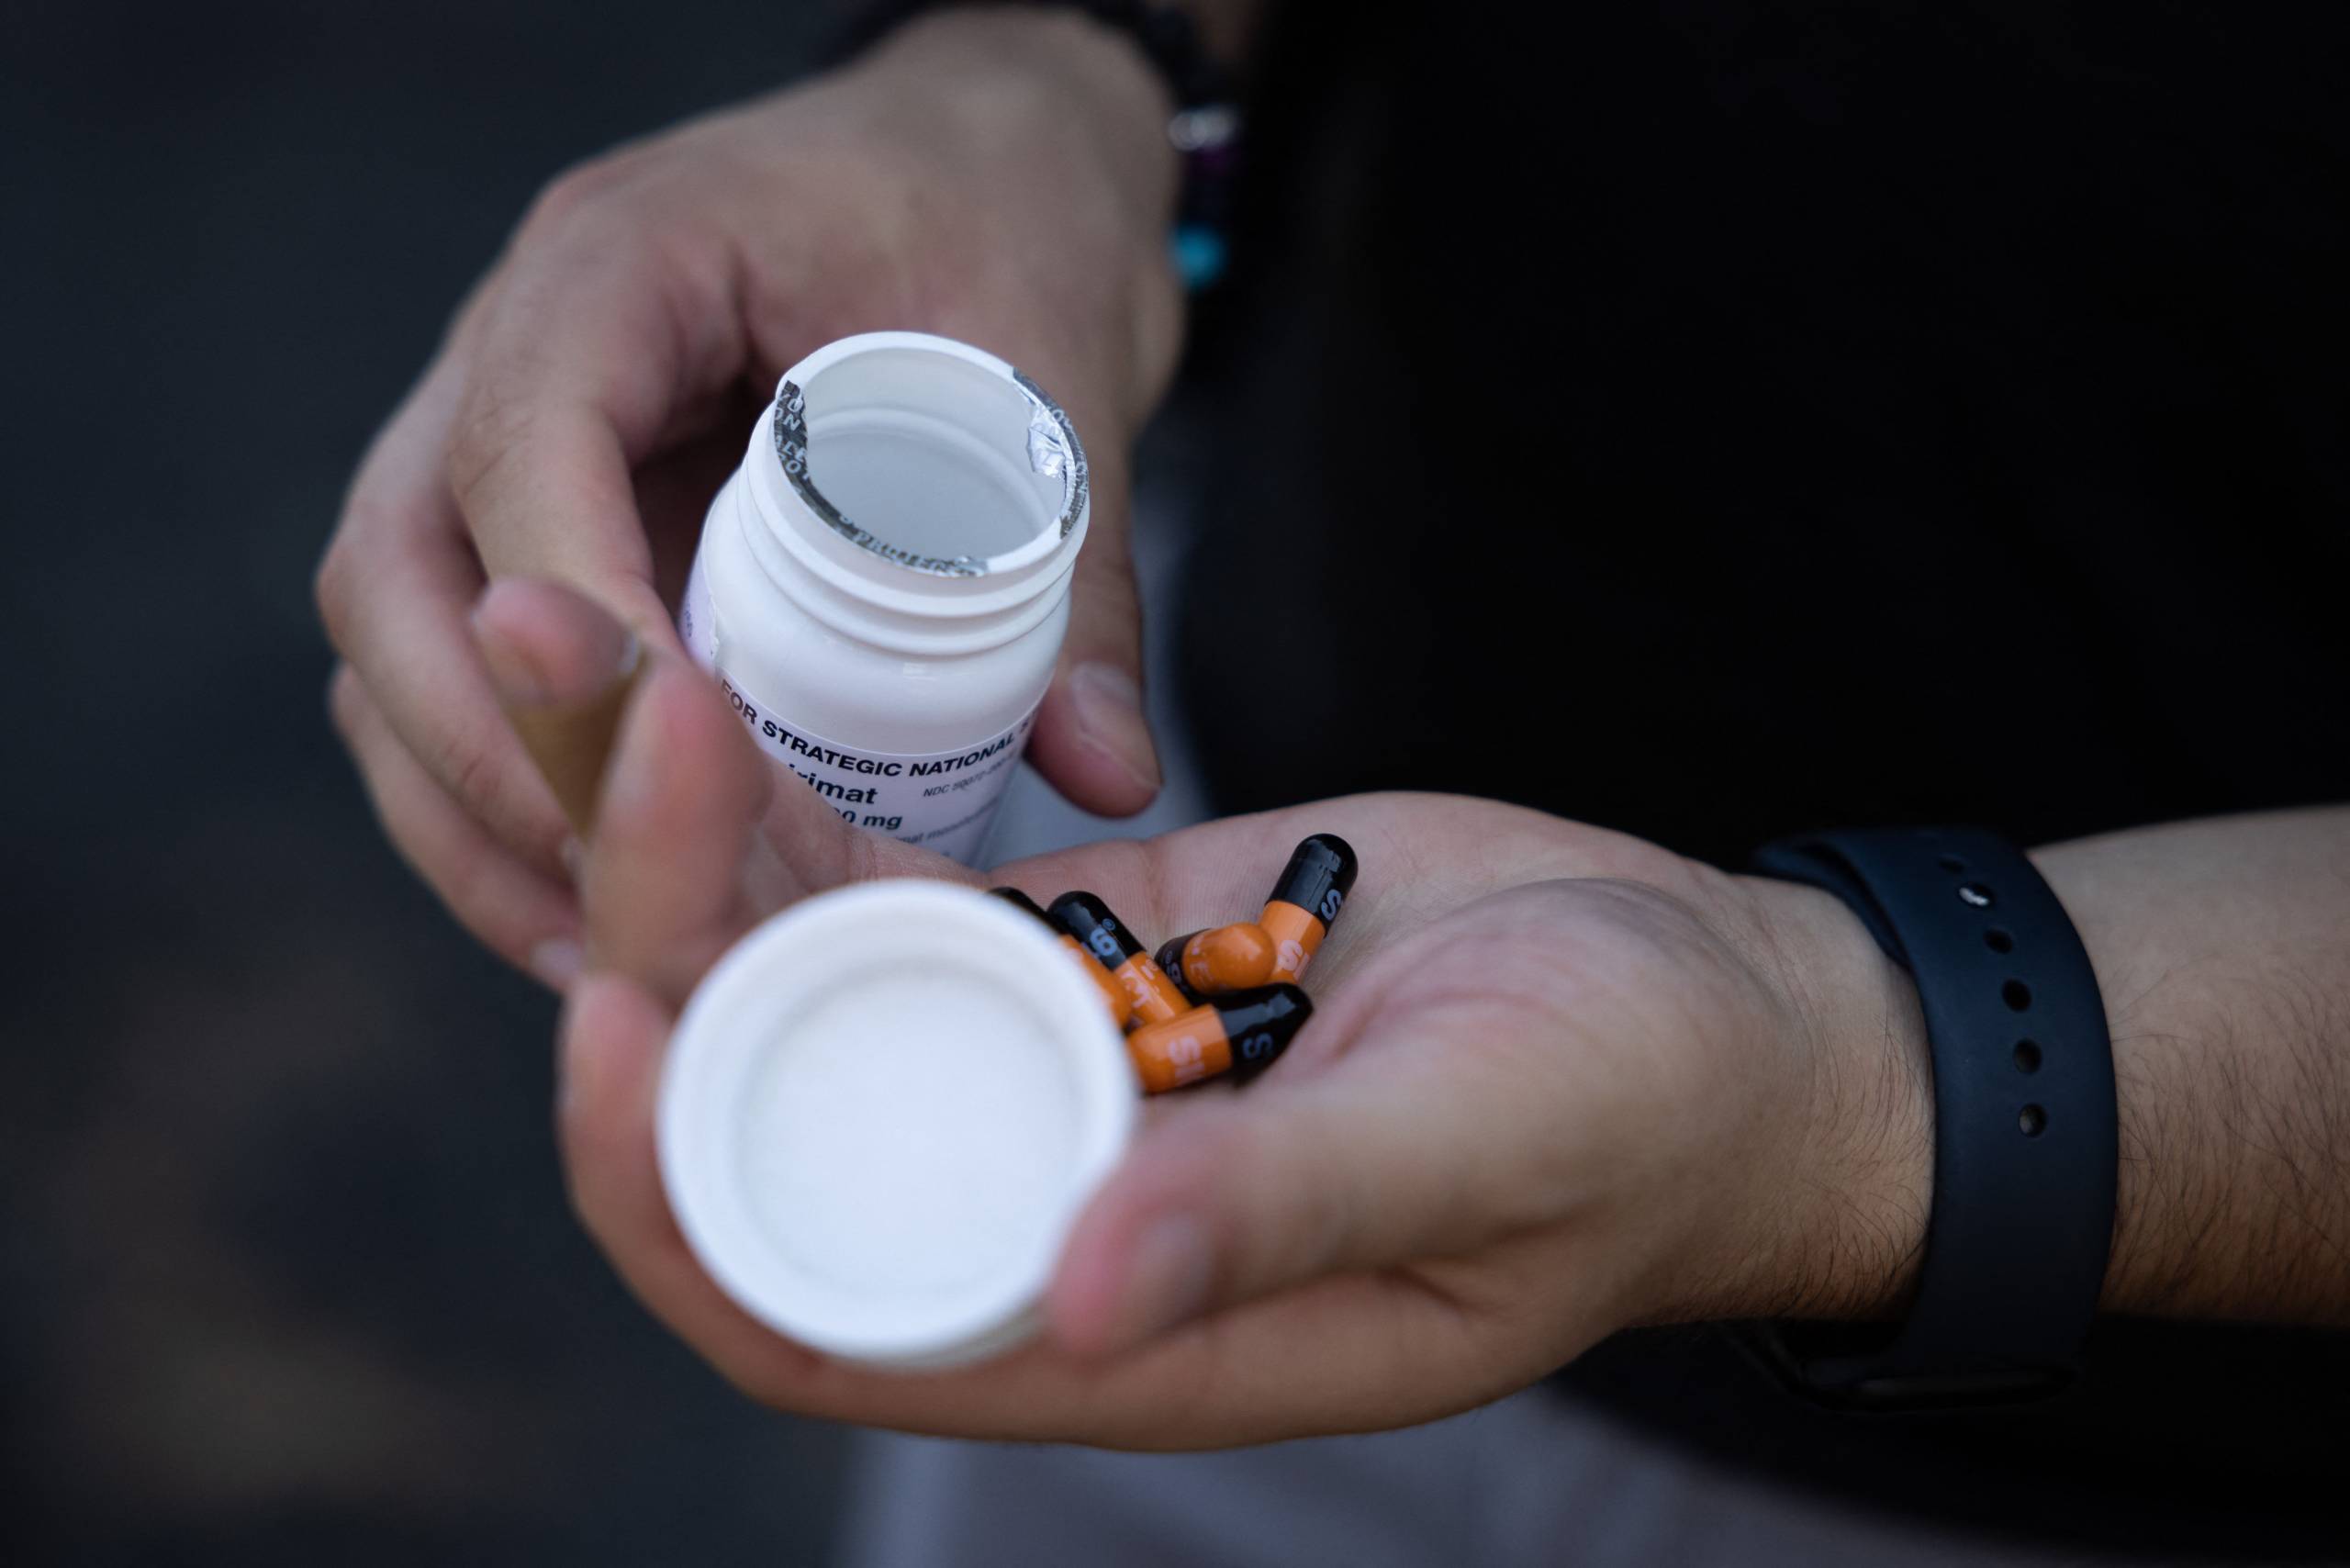 A person empties pills from a prescription pill canister into their other hand.